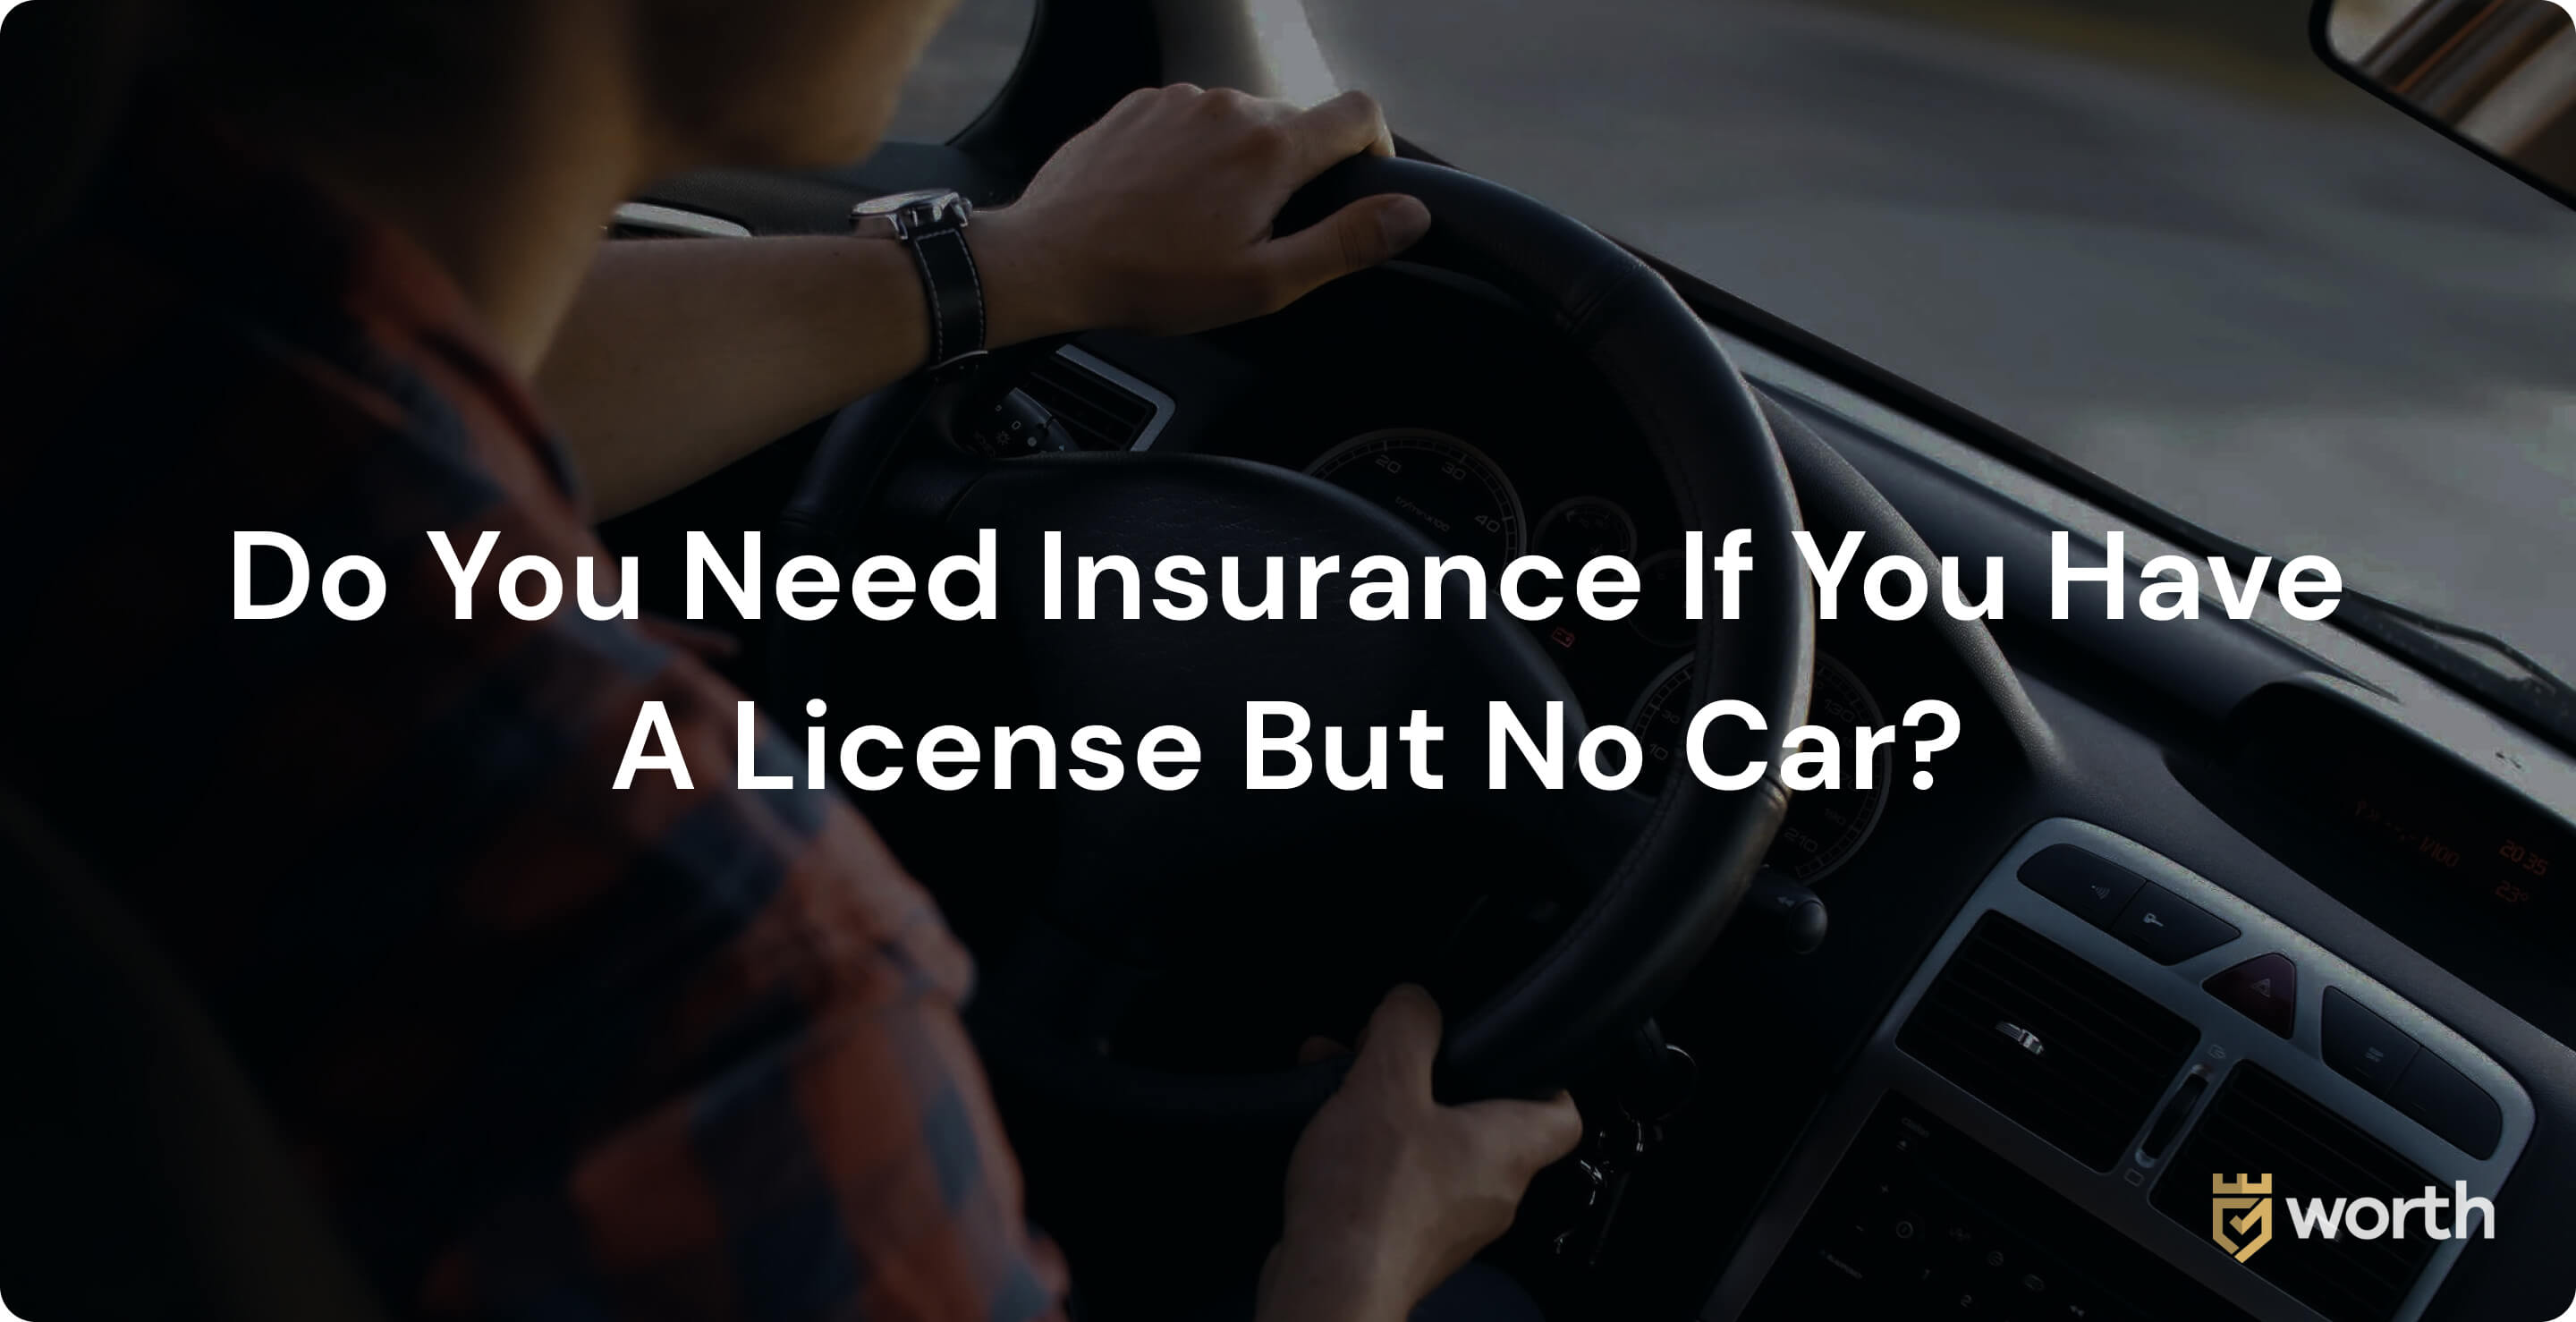 does a licensed driver without car need insurance